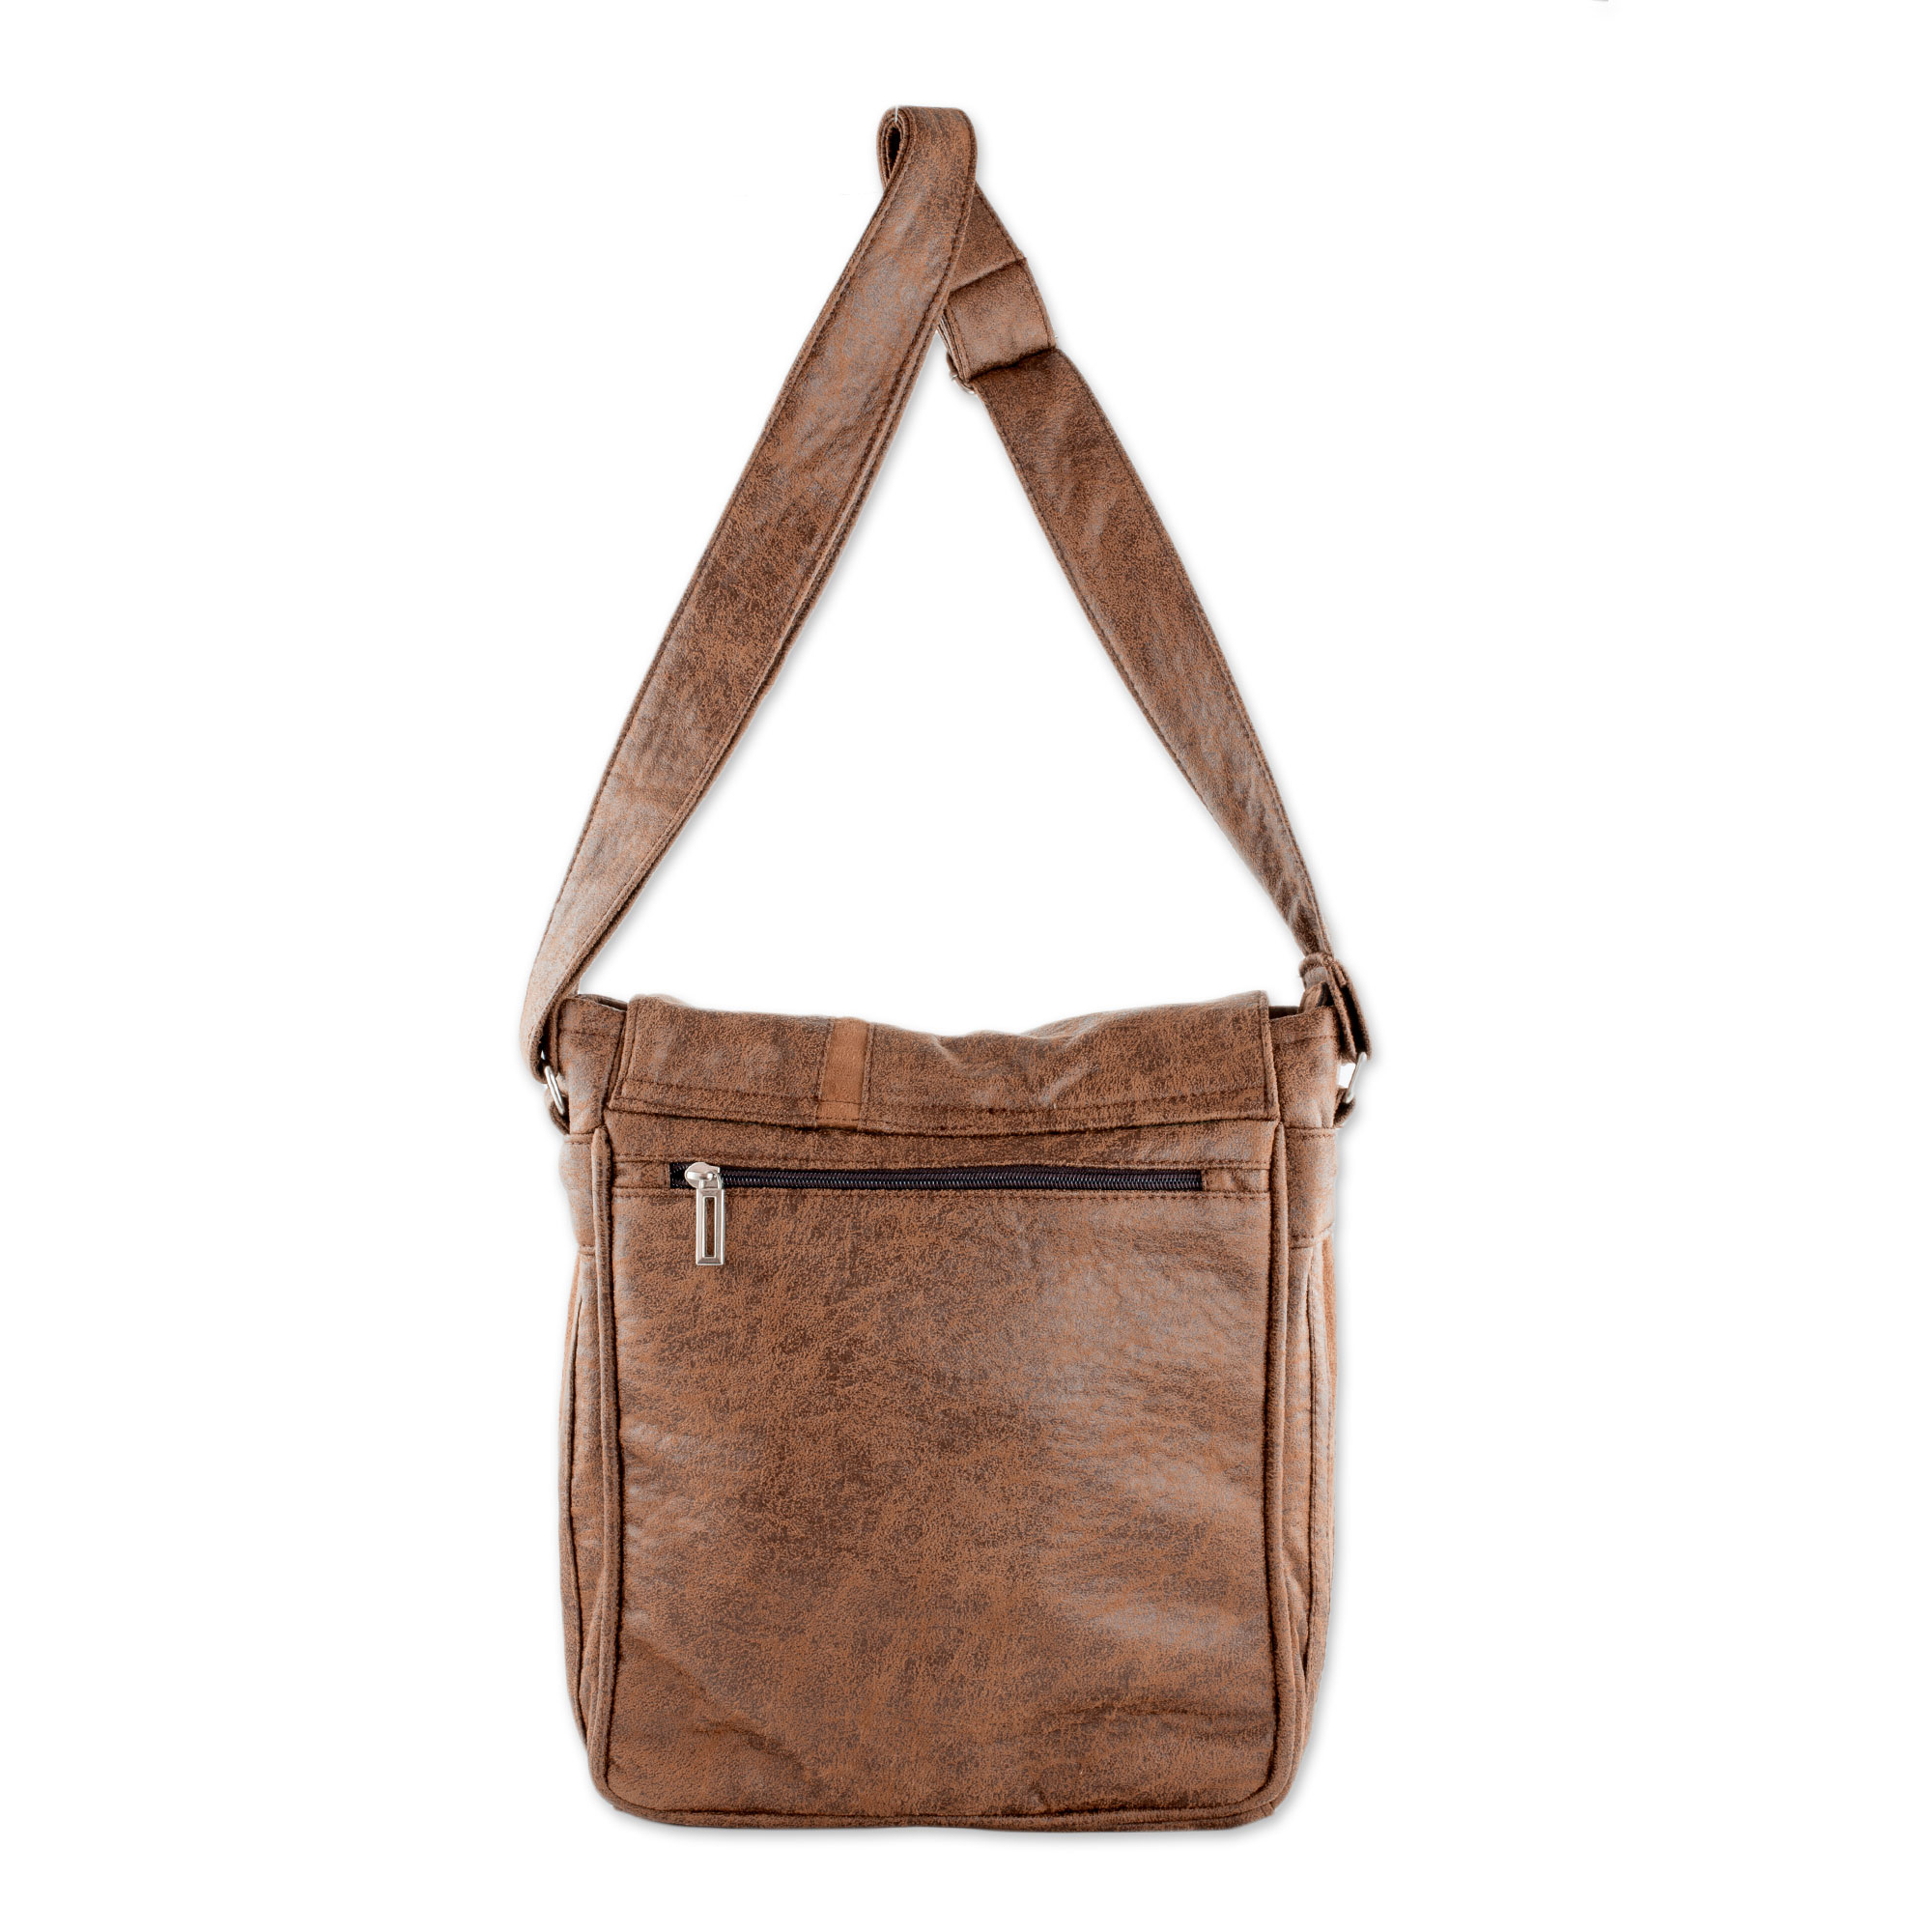 UNICEF Market | Faux Leather Messenger Bag in Chestnut from Costa Rica ...